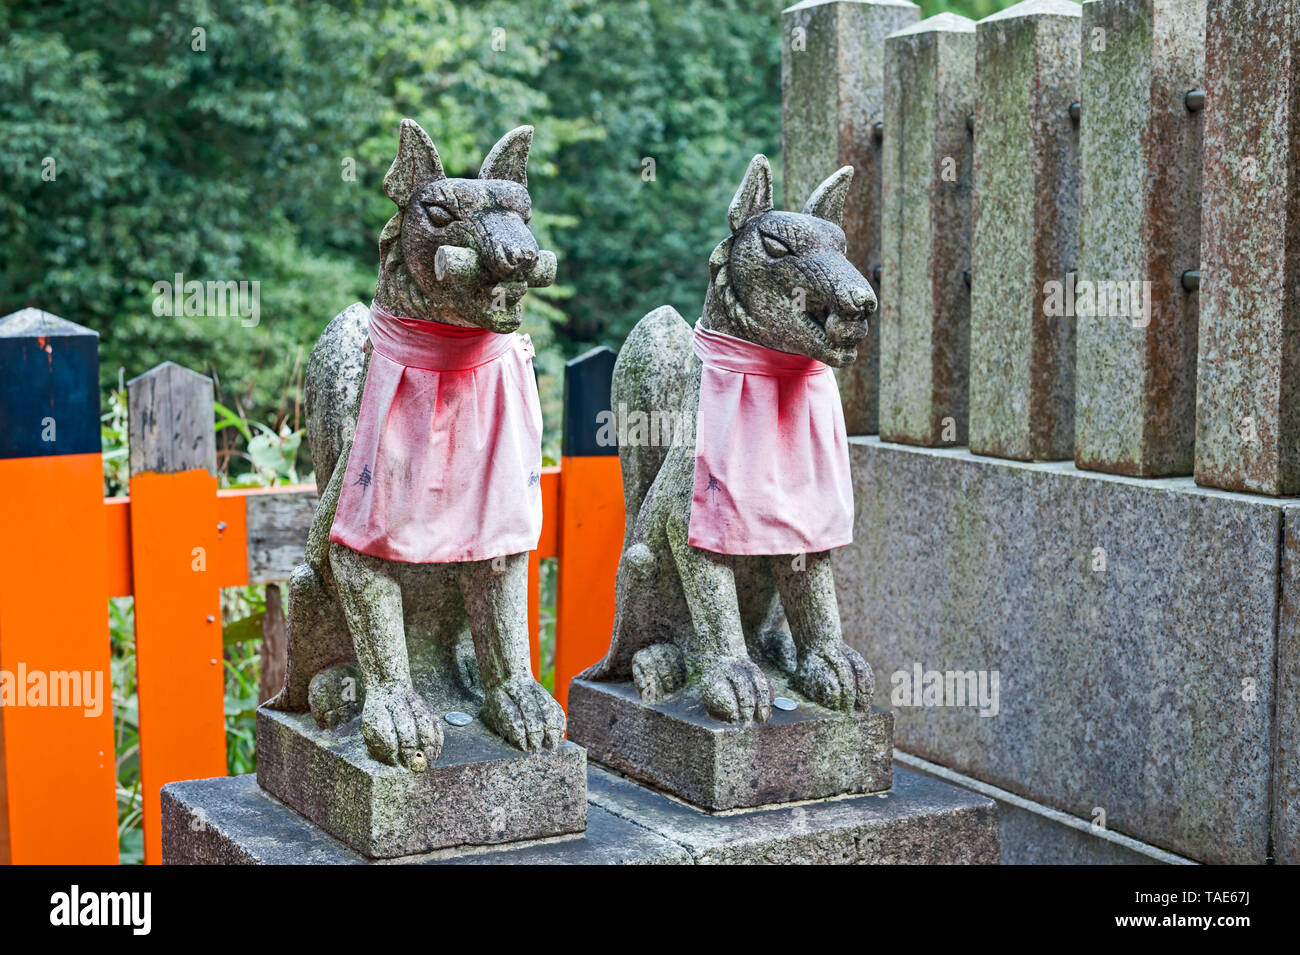 Two kitsune or messenger fox statues, wearing red bibs,  at the Shinto Fushimi Inari shrine in Southern Kyoto, Japan. Stock Photo